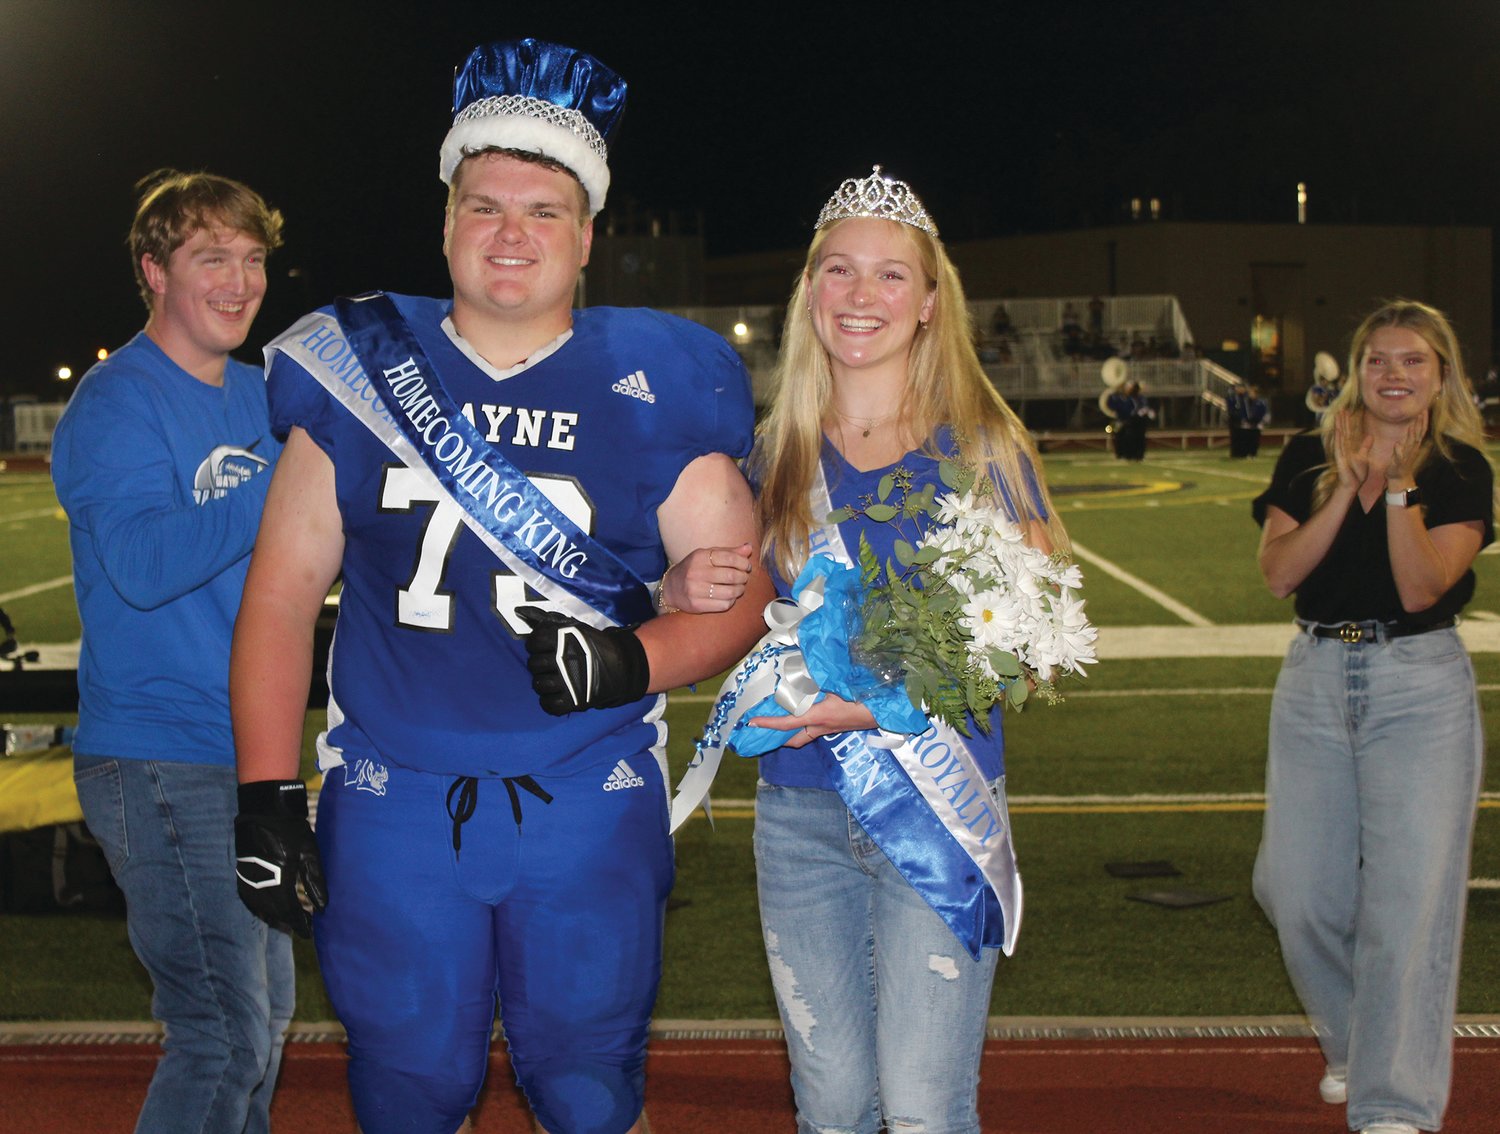 Bo Armstrong and Laura Hasemann were all smiles after being crowned 2022 Homecoming King and Queen for Wayne High School.